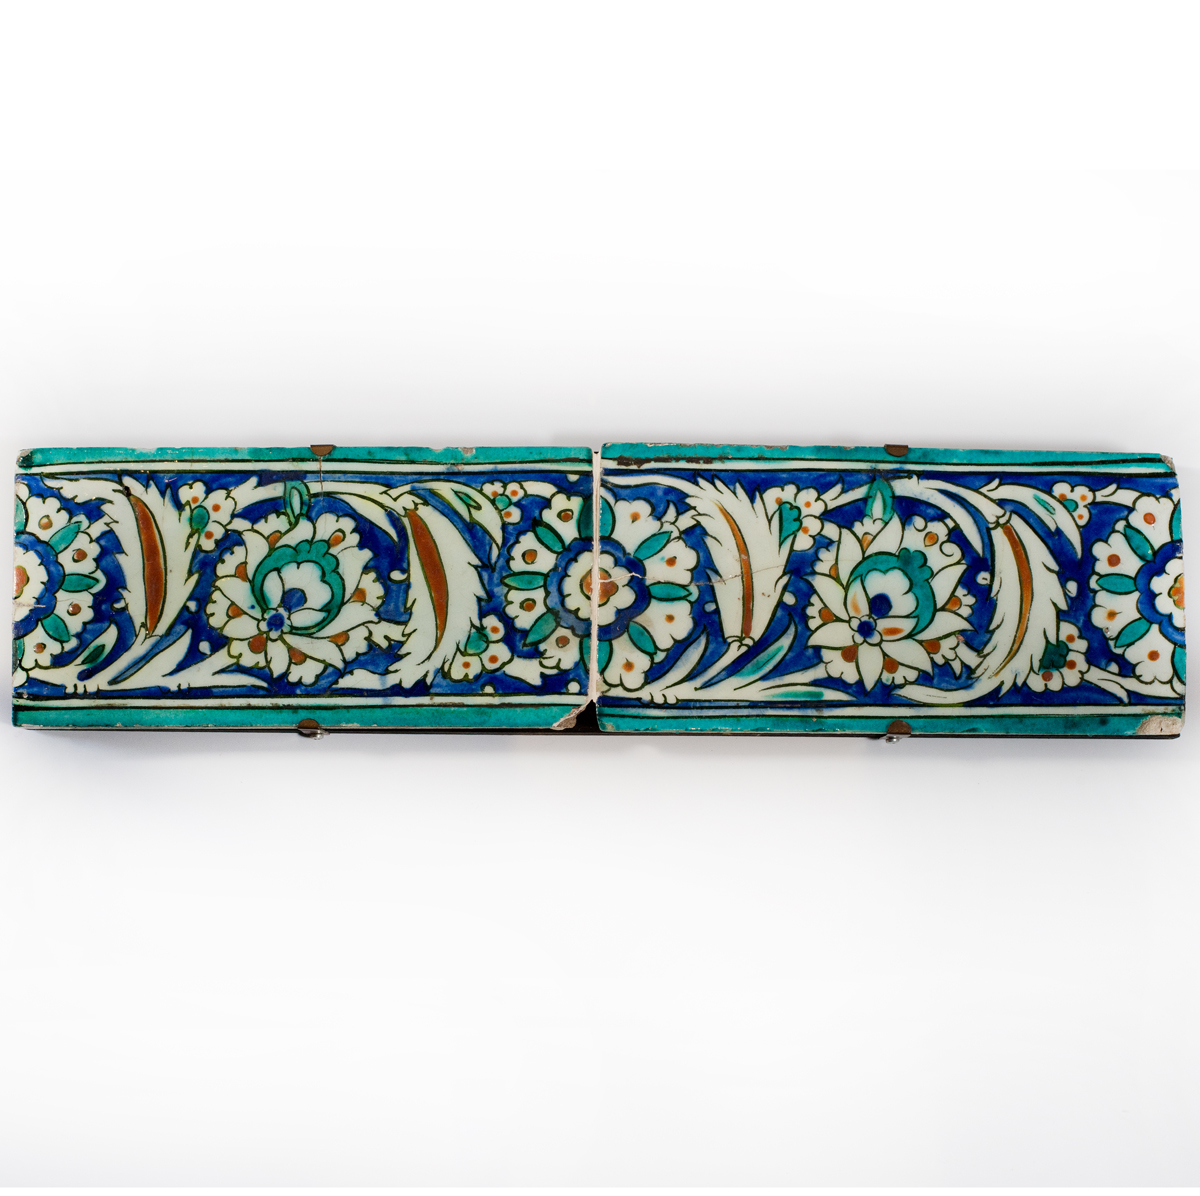 Two Ottoman Iznik border tiles, circa 1600, each of rectangular form, the glazed fritware painted in underglaze turquoise, cobalt blue, black and terracotta red with a continuous band of leafy arabesque scrolls enclosing flowerheads, with turquoise borders mounted Turkish c1600